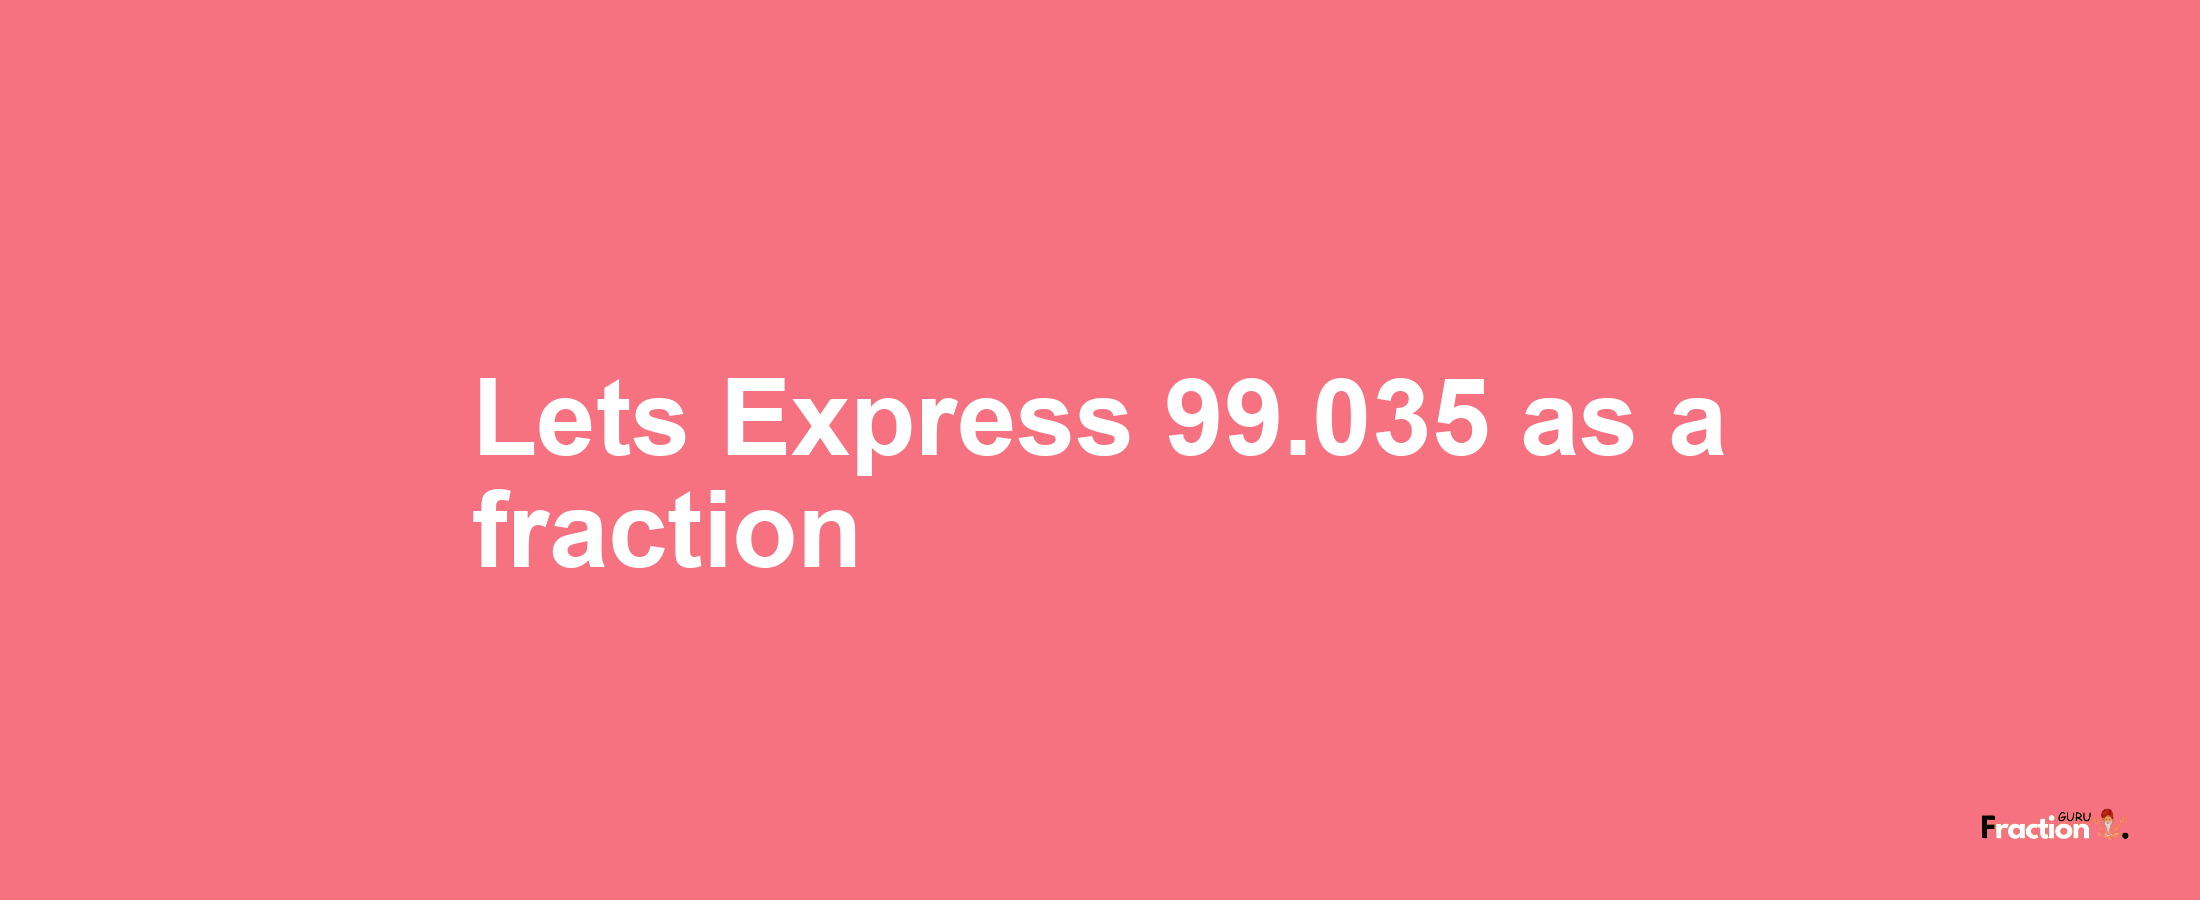 Lets Express 99.035 as afraction